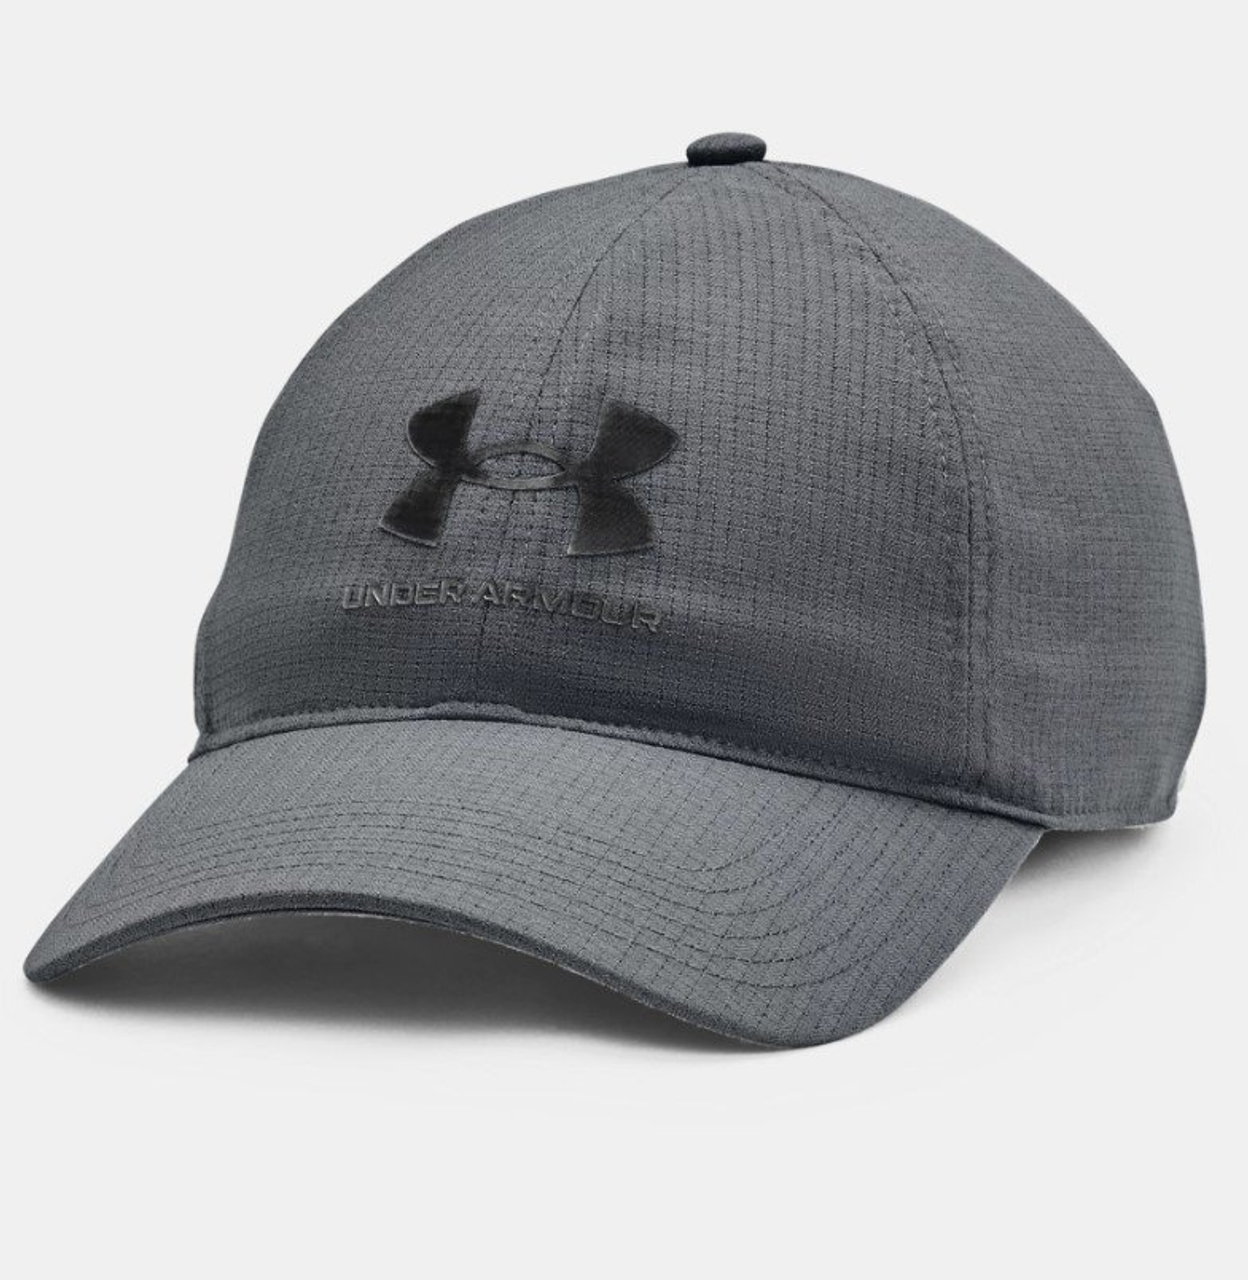 Under Armour Men's Iso-chill ArmourVent Fish Adjustable Cap